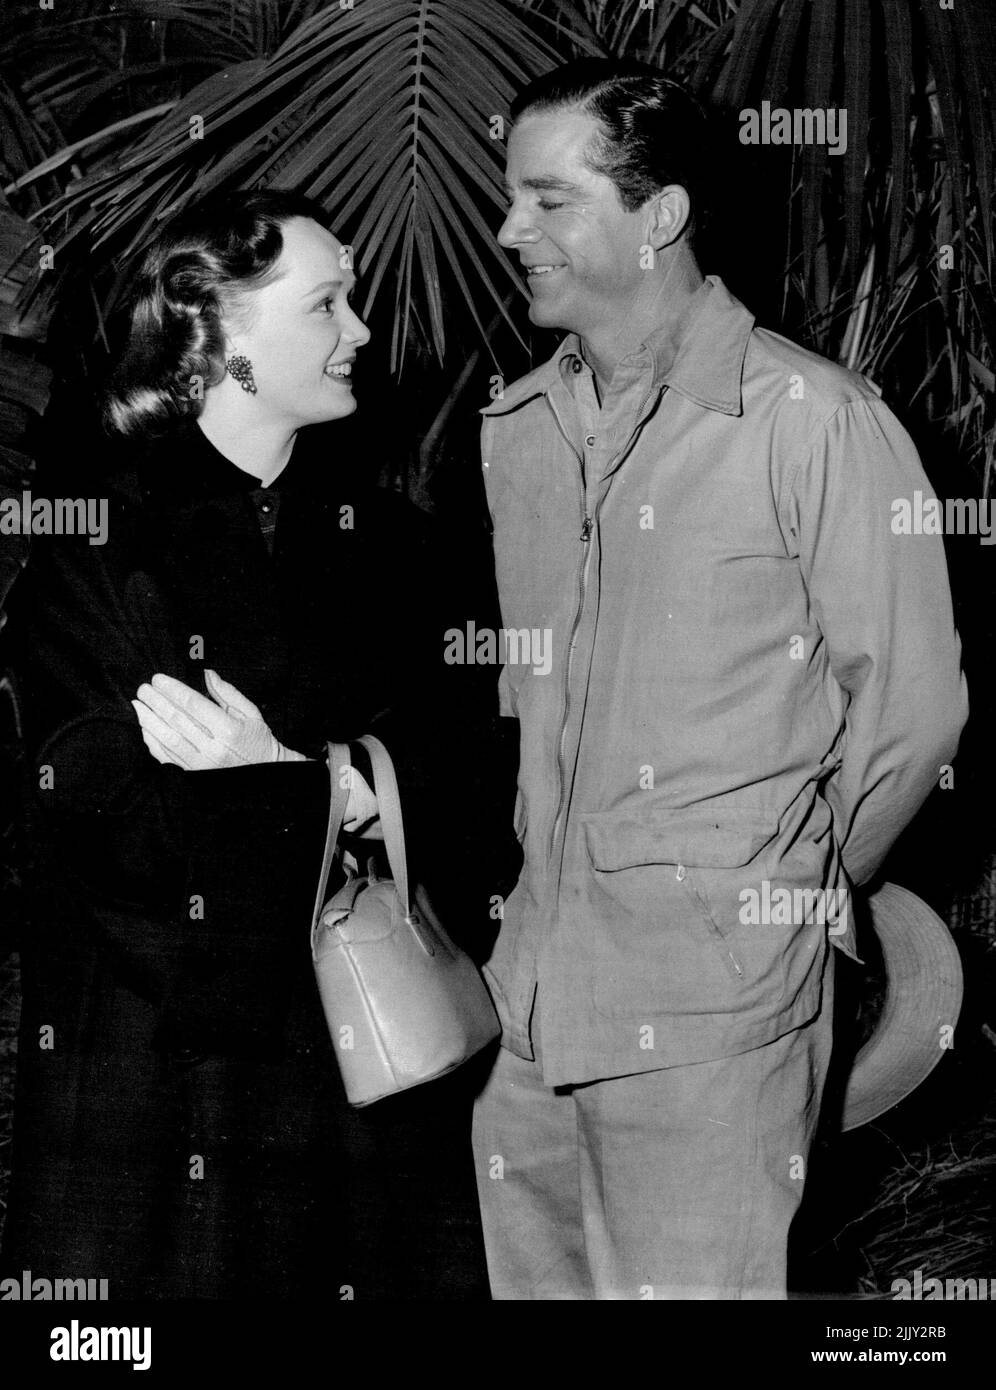 Meeting In 'The Jungle' -- Mary Parker, talented actress sister of Lieutenant-Commander Michael Parker (the Duke of Edinburgh's Personal Equerry), talks with Dana Andrews on the Associated British set as Elstree, Hertfordshire, where he is starring in 'Duel in the Jungle'. Miss Parker, who established a reputation as an actress in Australia, recently arrived in England to continue her career on stage and screen. December 3, 1953. (Photo by Reuterphoto). Stock Photo